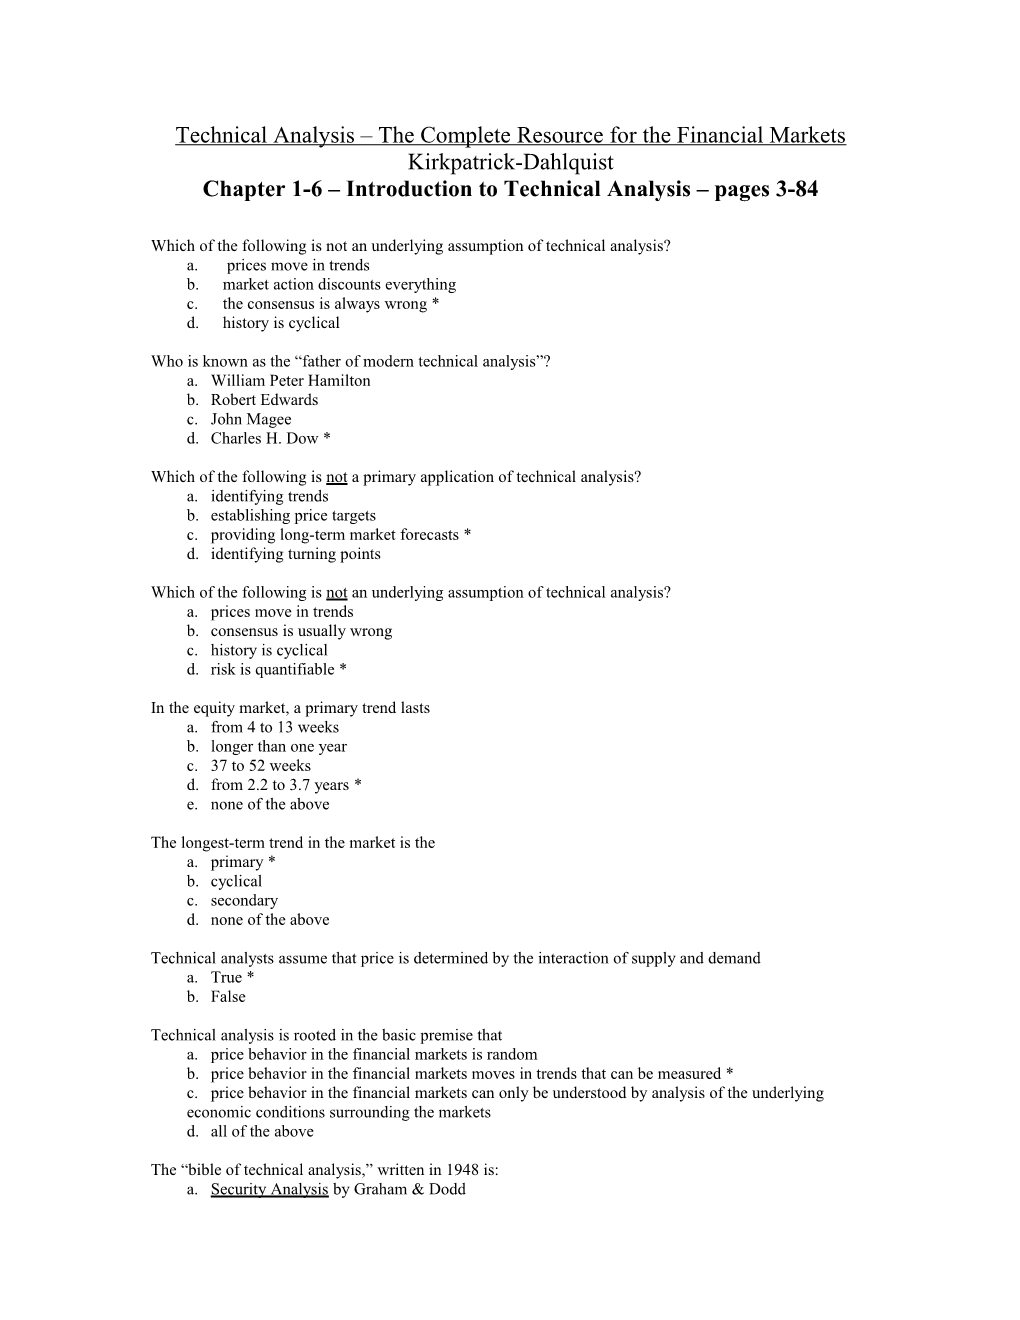 Chapter 1-6 Introduction to Technical Analysis Pages 3-84